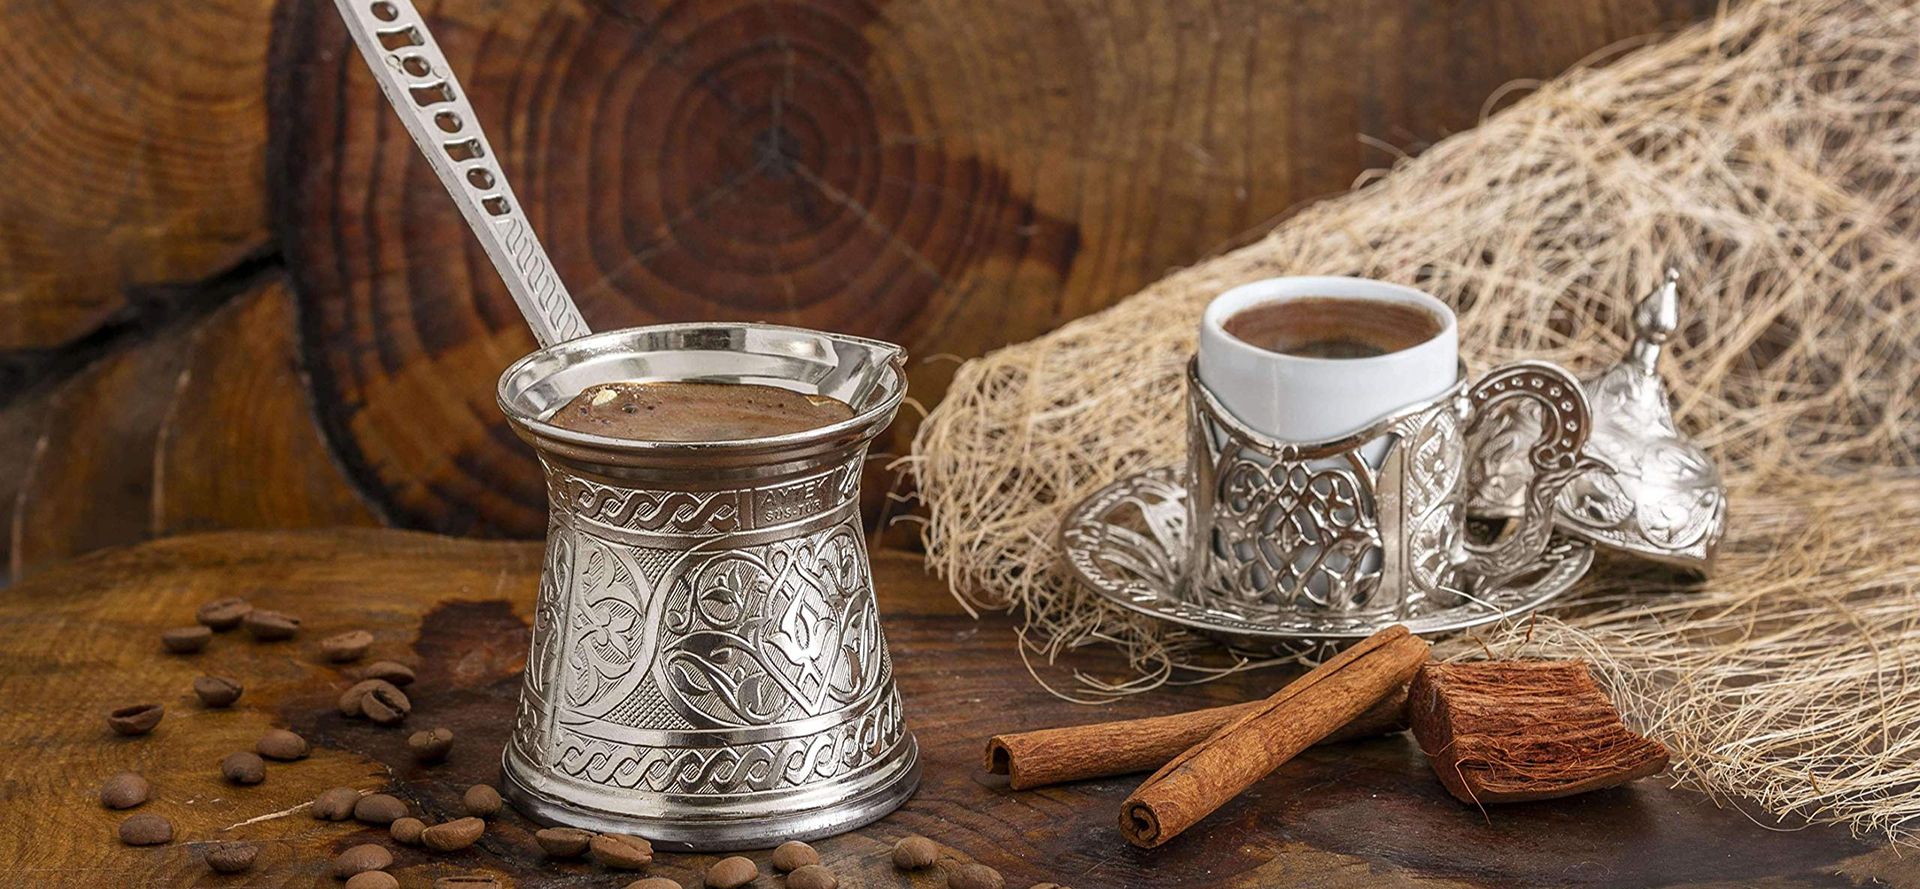 Stainless steel turkish coffee pot with a cup of coffee.